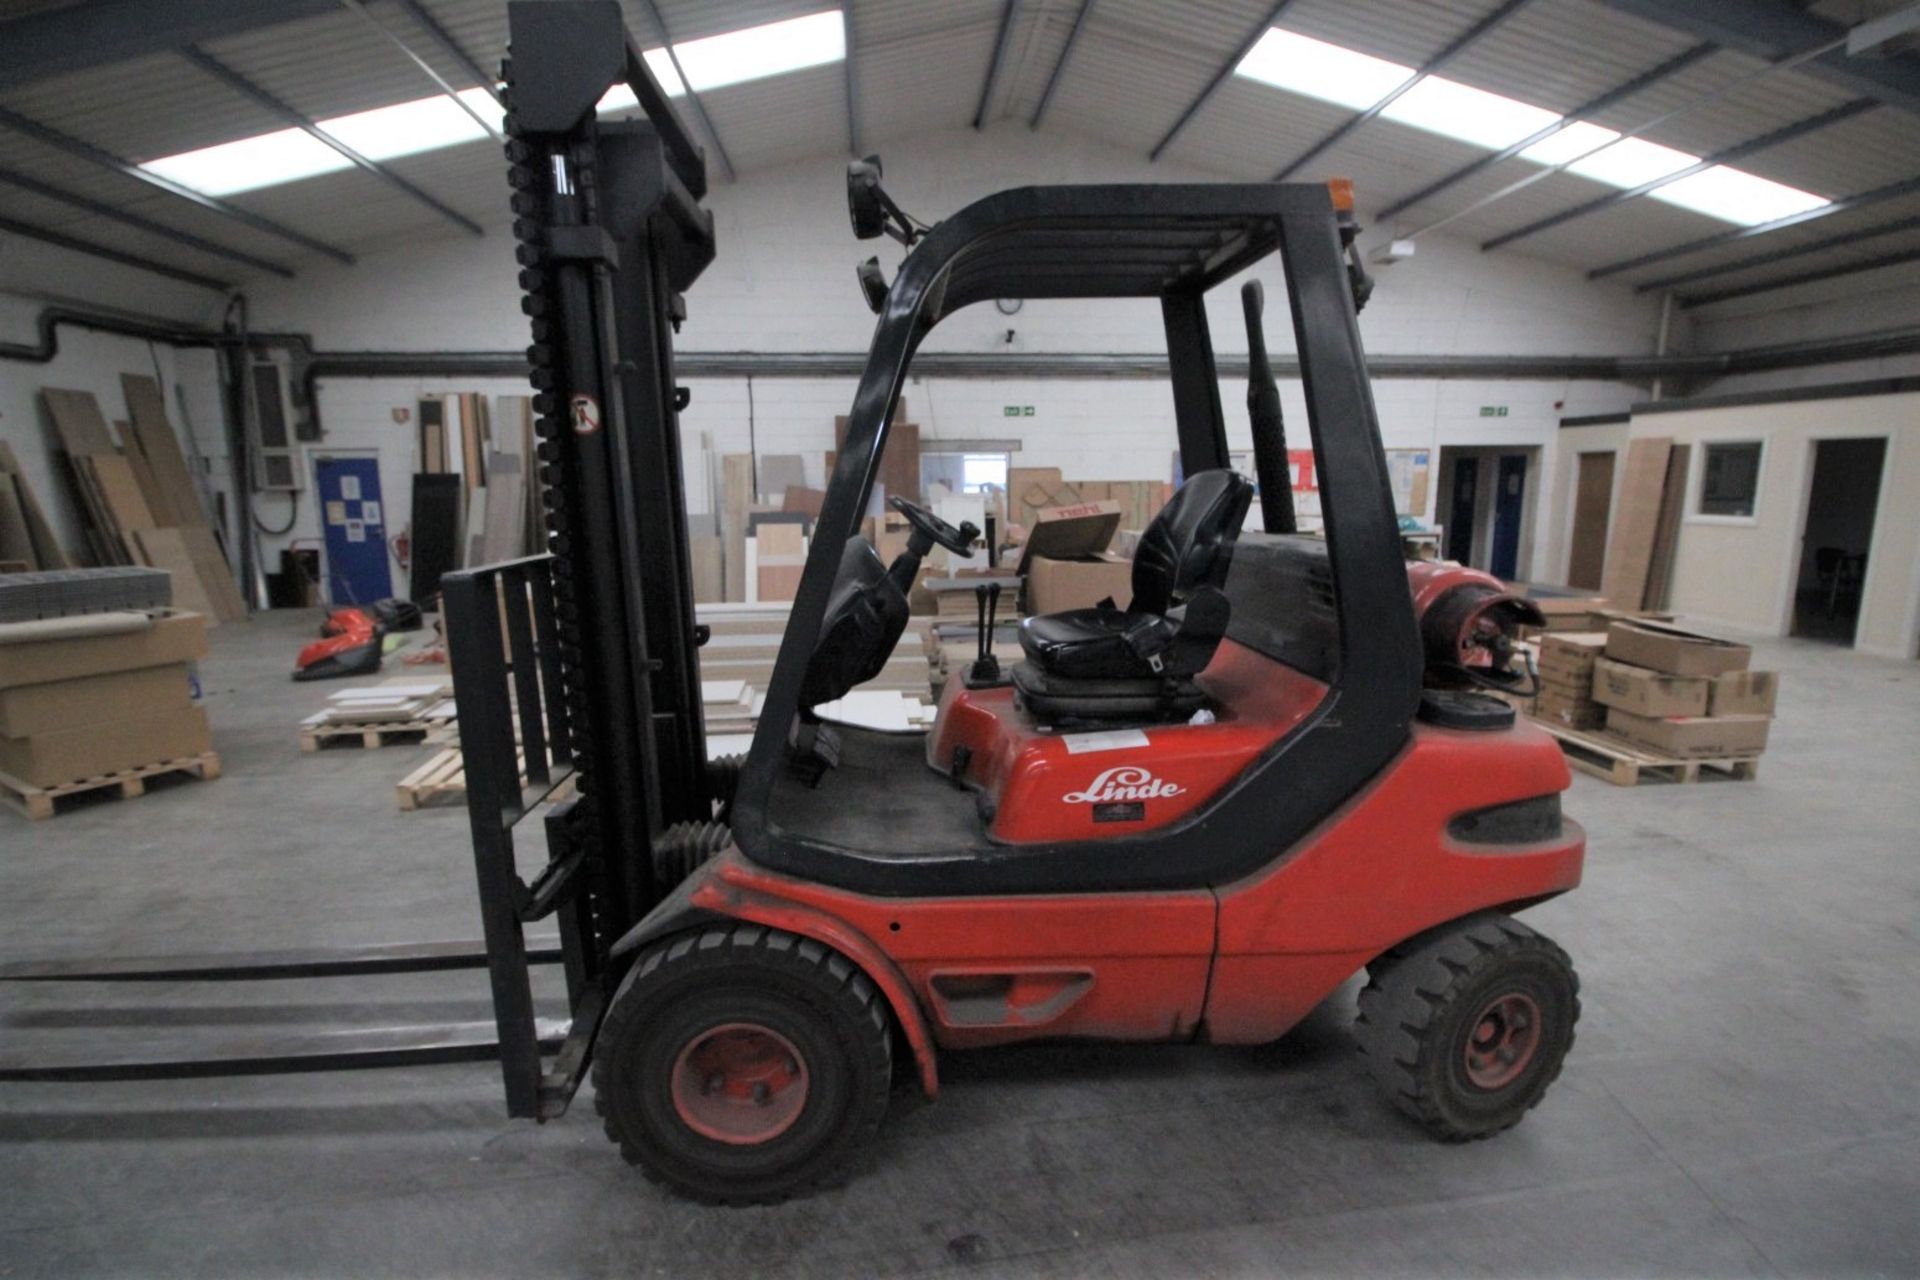 LINDE H30 GAS FIRED 3-TONNE CAPACITY FORKLIFT, 1664 RECORDED HOURS ON CLOCK, SERIAL NO.